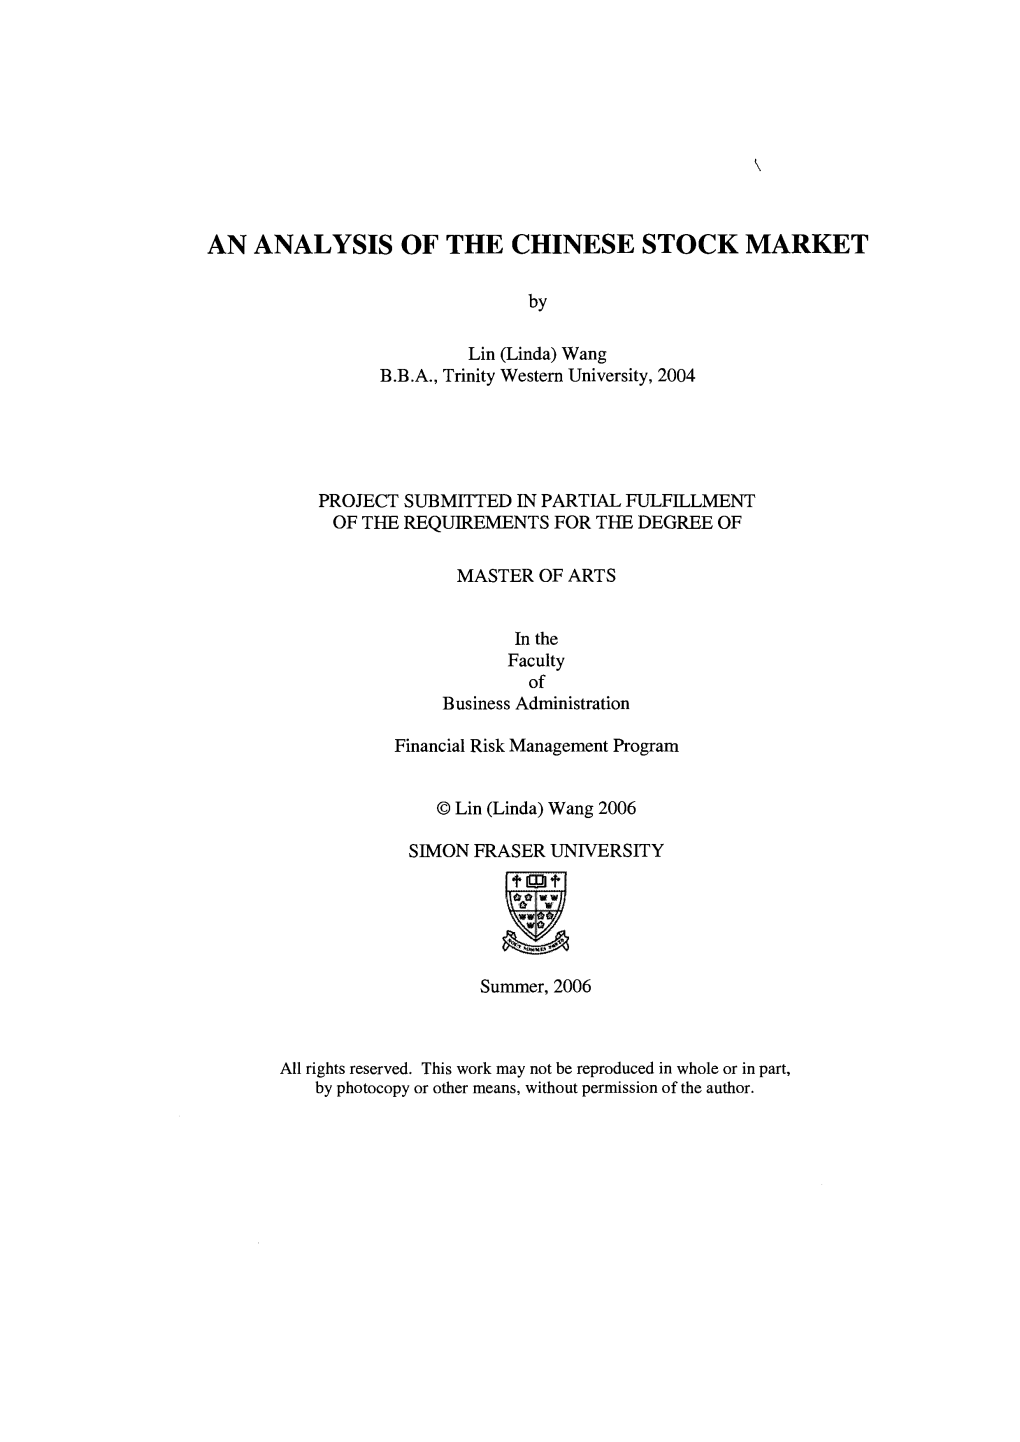 An Analysis of the Chinese Stock Market